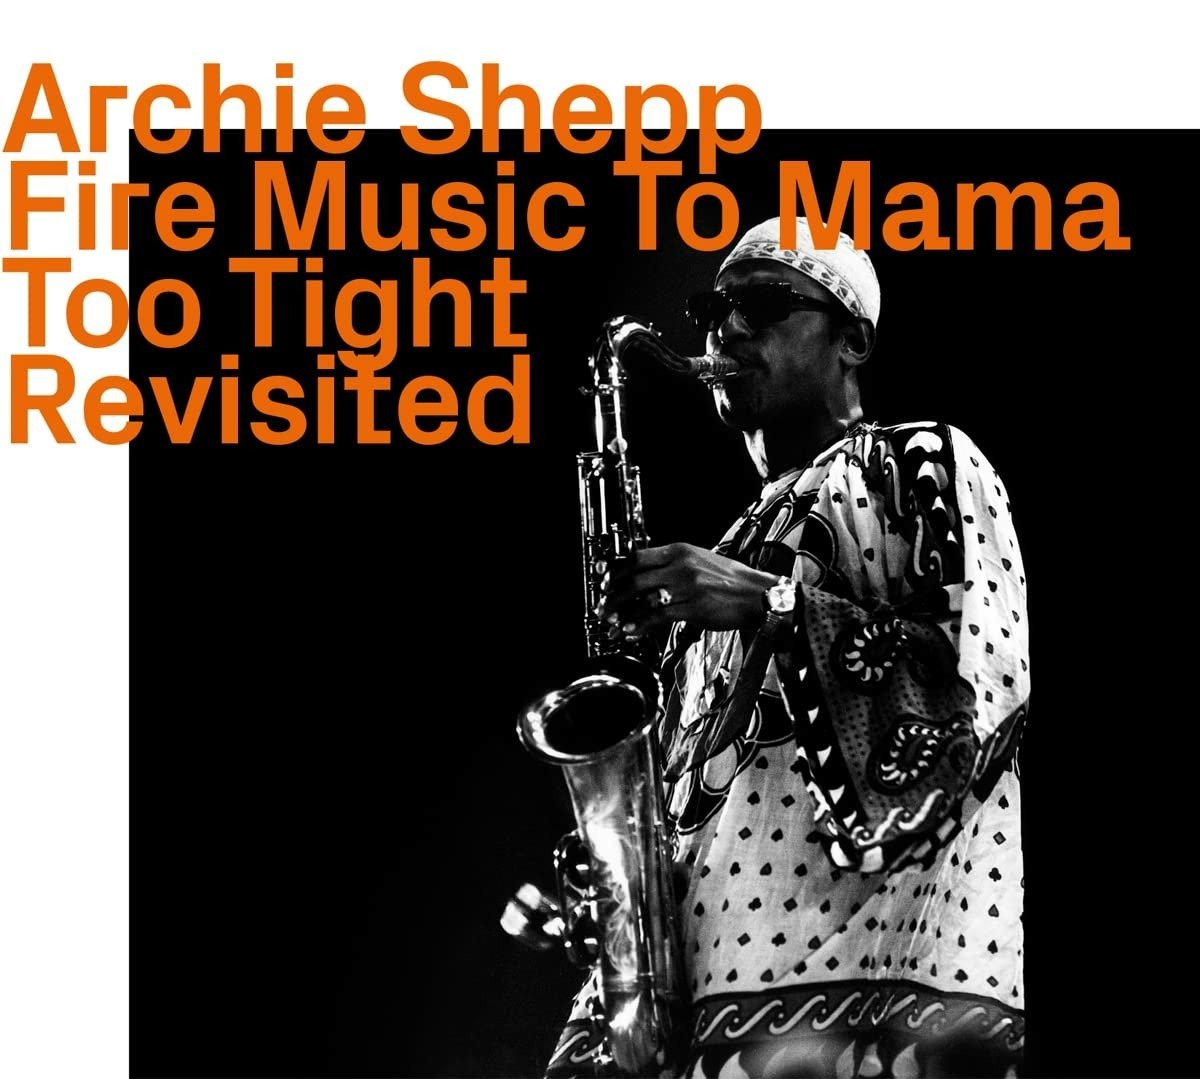 CD Shop - SHEPP, ARCHIE FIRE MUSIC TO MAMA TOO FIGHT REVISITED